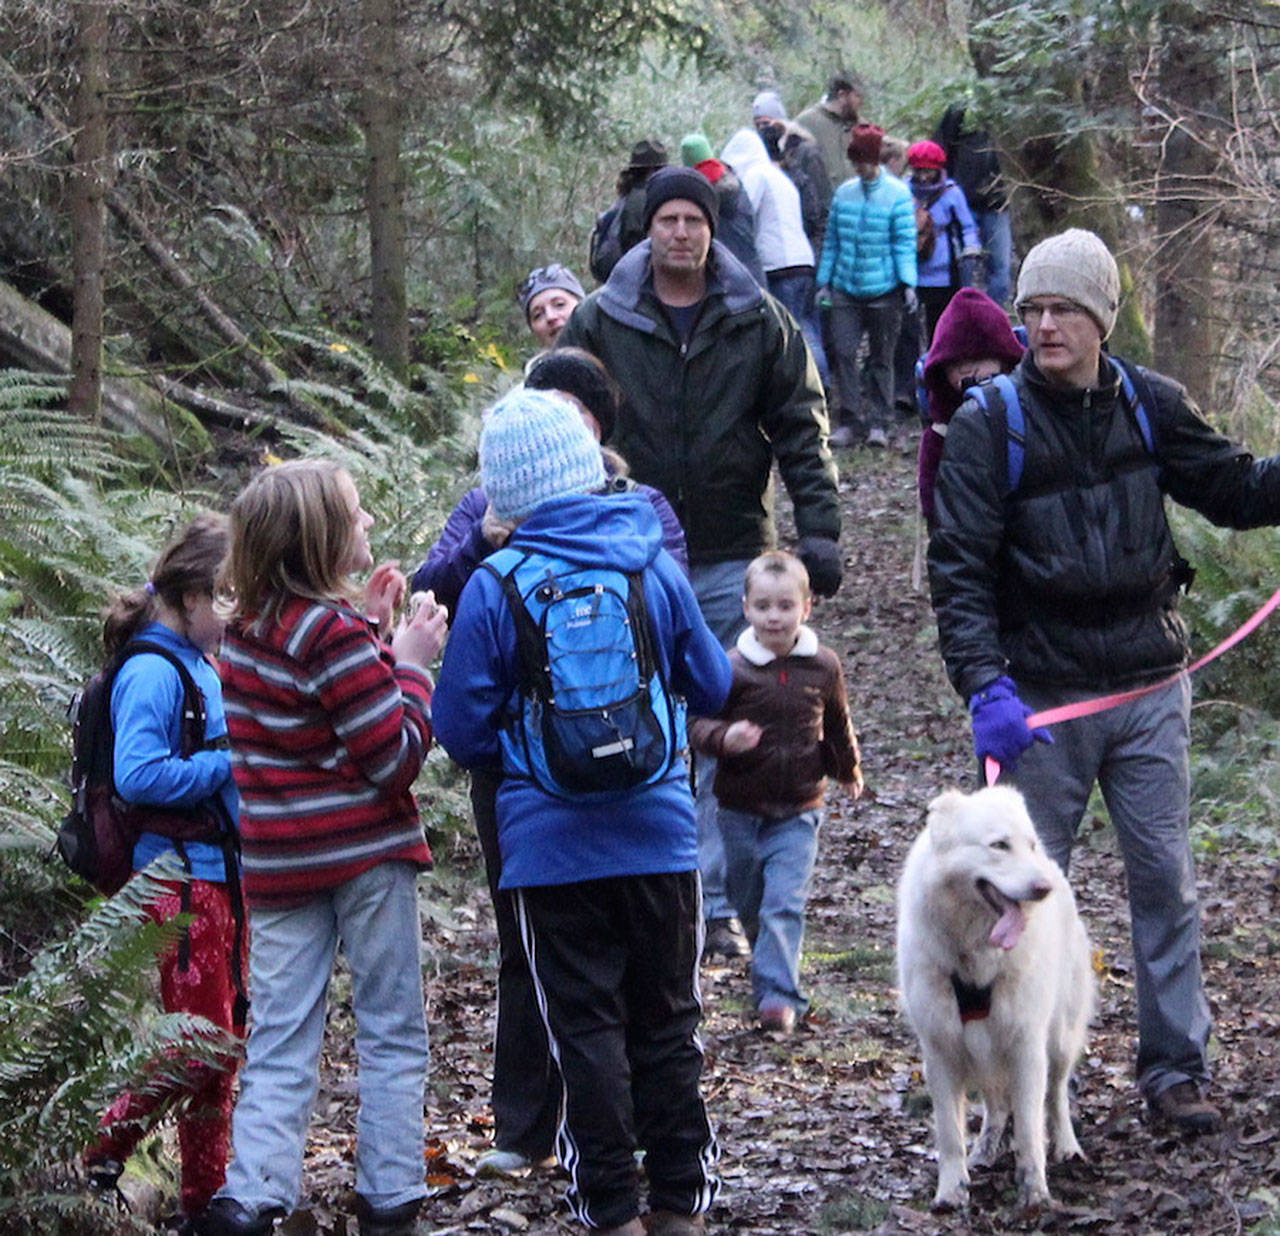 More than 100 people came out to explore two Whidbey Island parks on First Day Hike on New Year’s Day. Friends of Whidbey State Parks helped organize the event. (Photo provided)